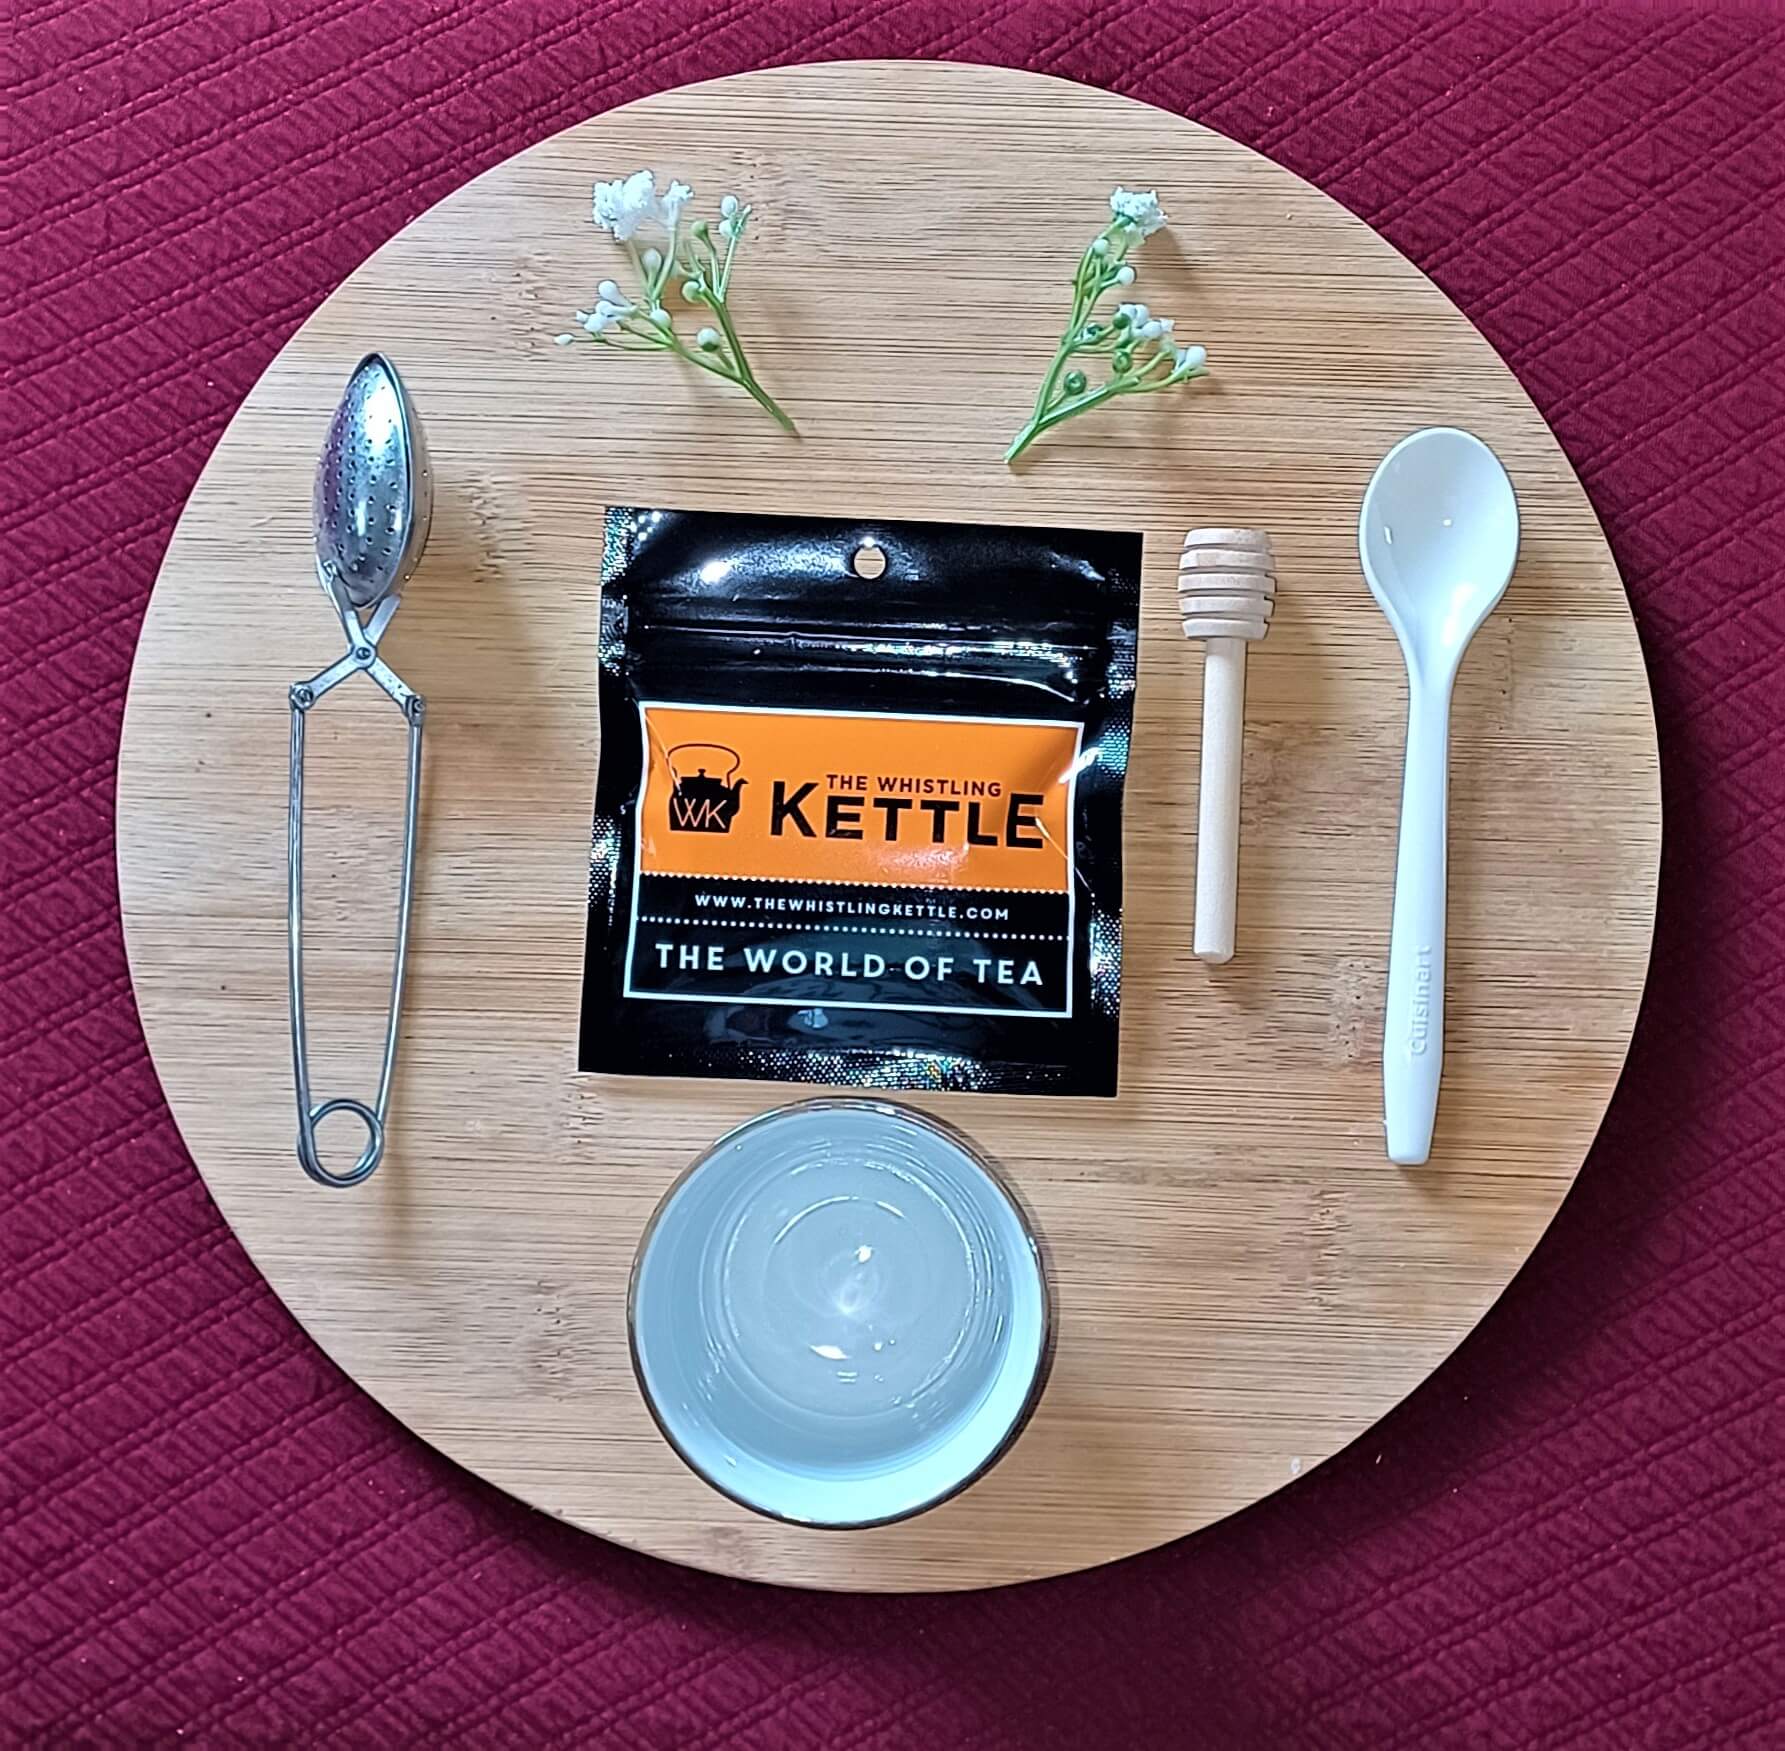 The Whistling Kettle spread